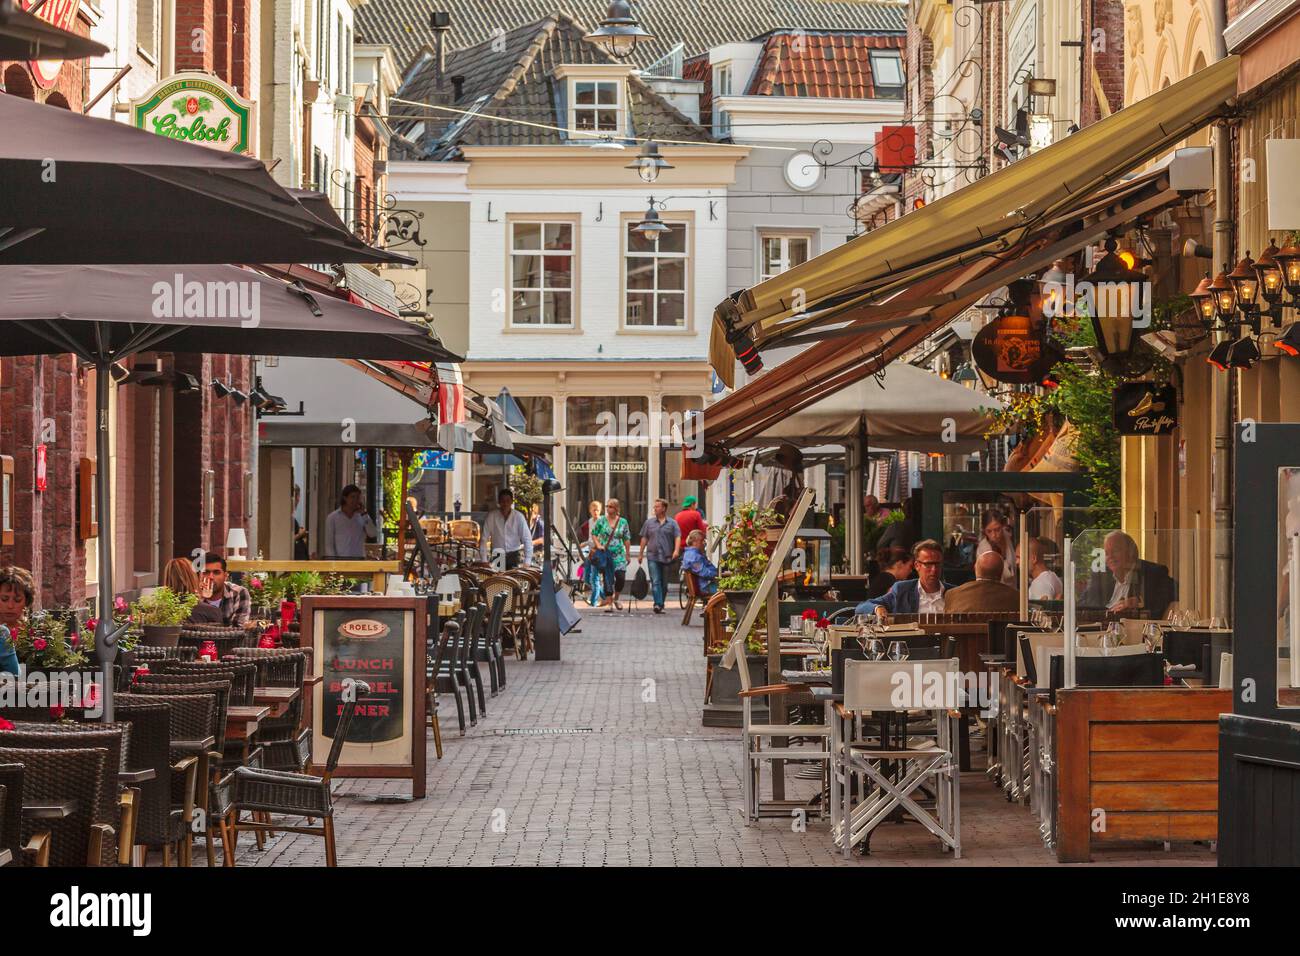 Den Bosch High Resolution Stock Photography and Images - Alamy